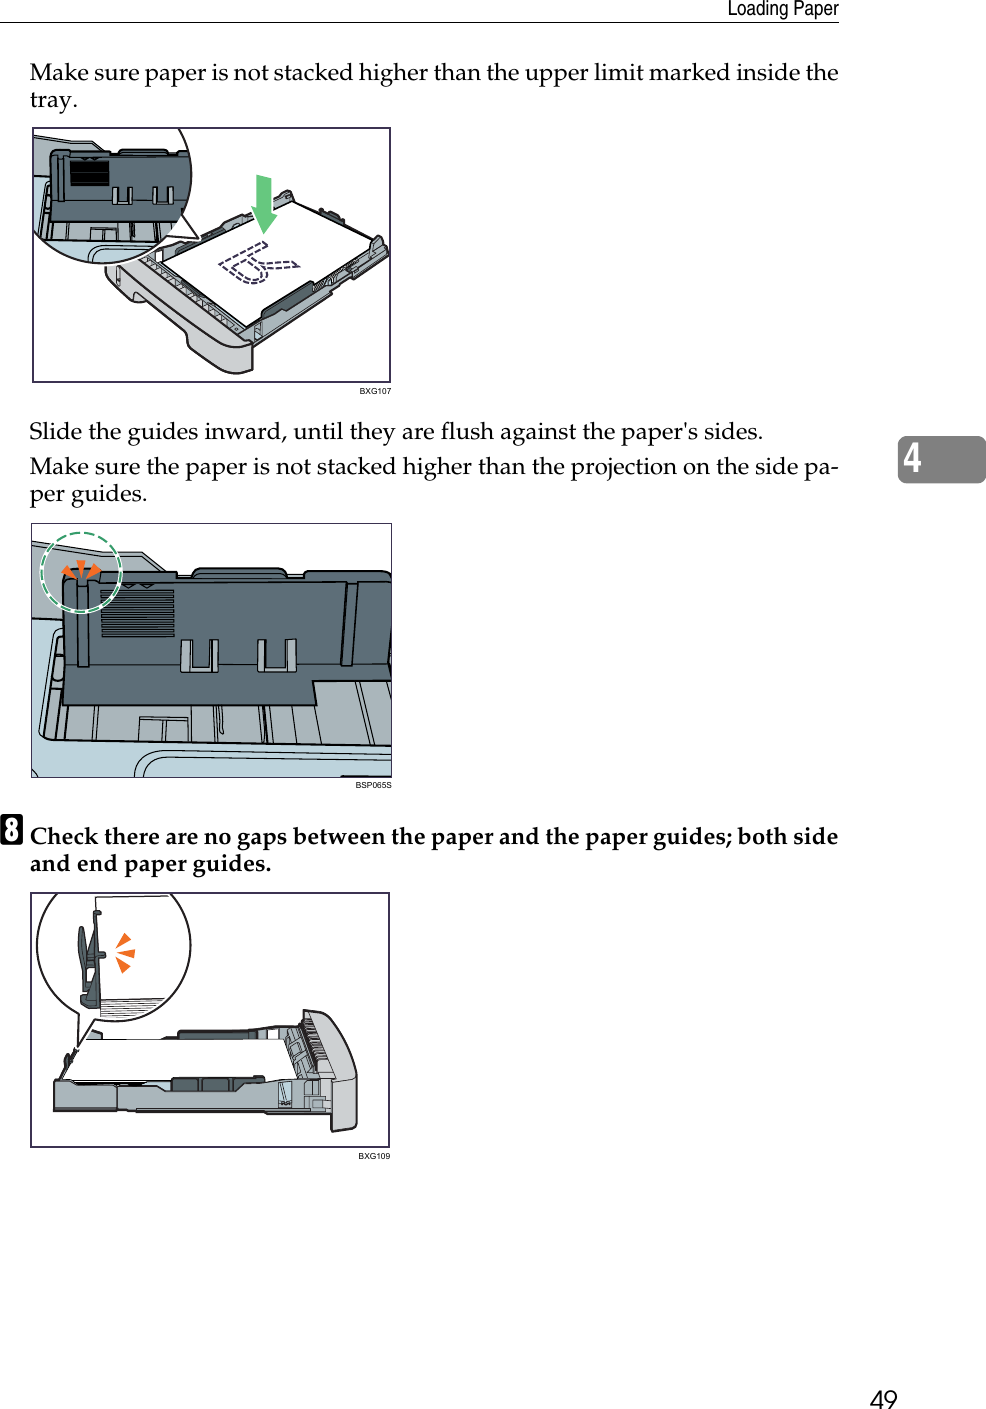 Loading Paper494Make sure paper is not stacked higher than the upper limit marked inside thetray.Slide the guides inward, until they are flush against the paper&apos;s sides.Make sure the paper is not stacked higher than the projection on the side pa-per guides.HCheck there are no gaps between the paper and the paper guides; both sideand end paper guides.BXG107BSP065SBXG109